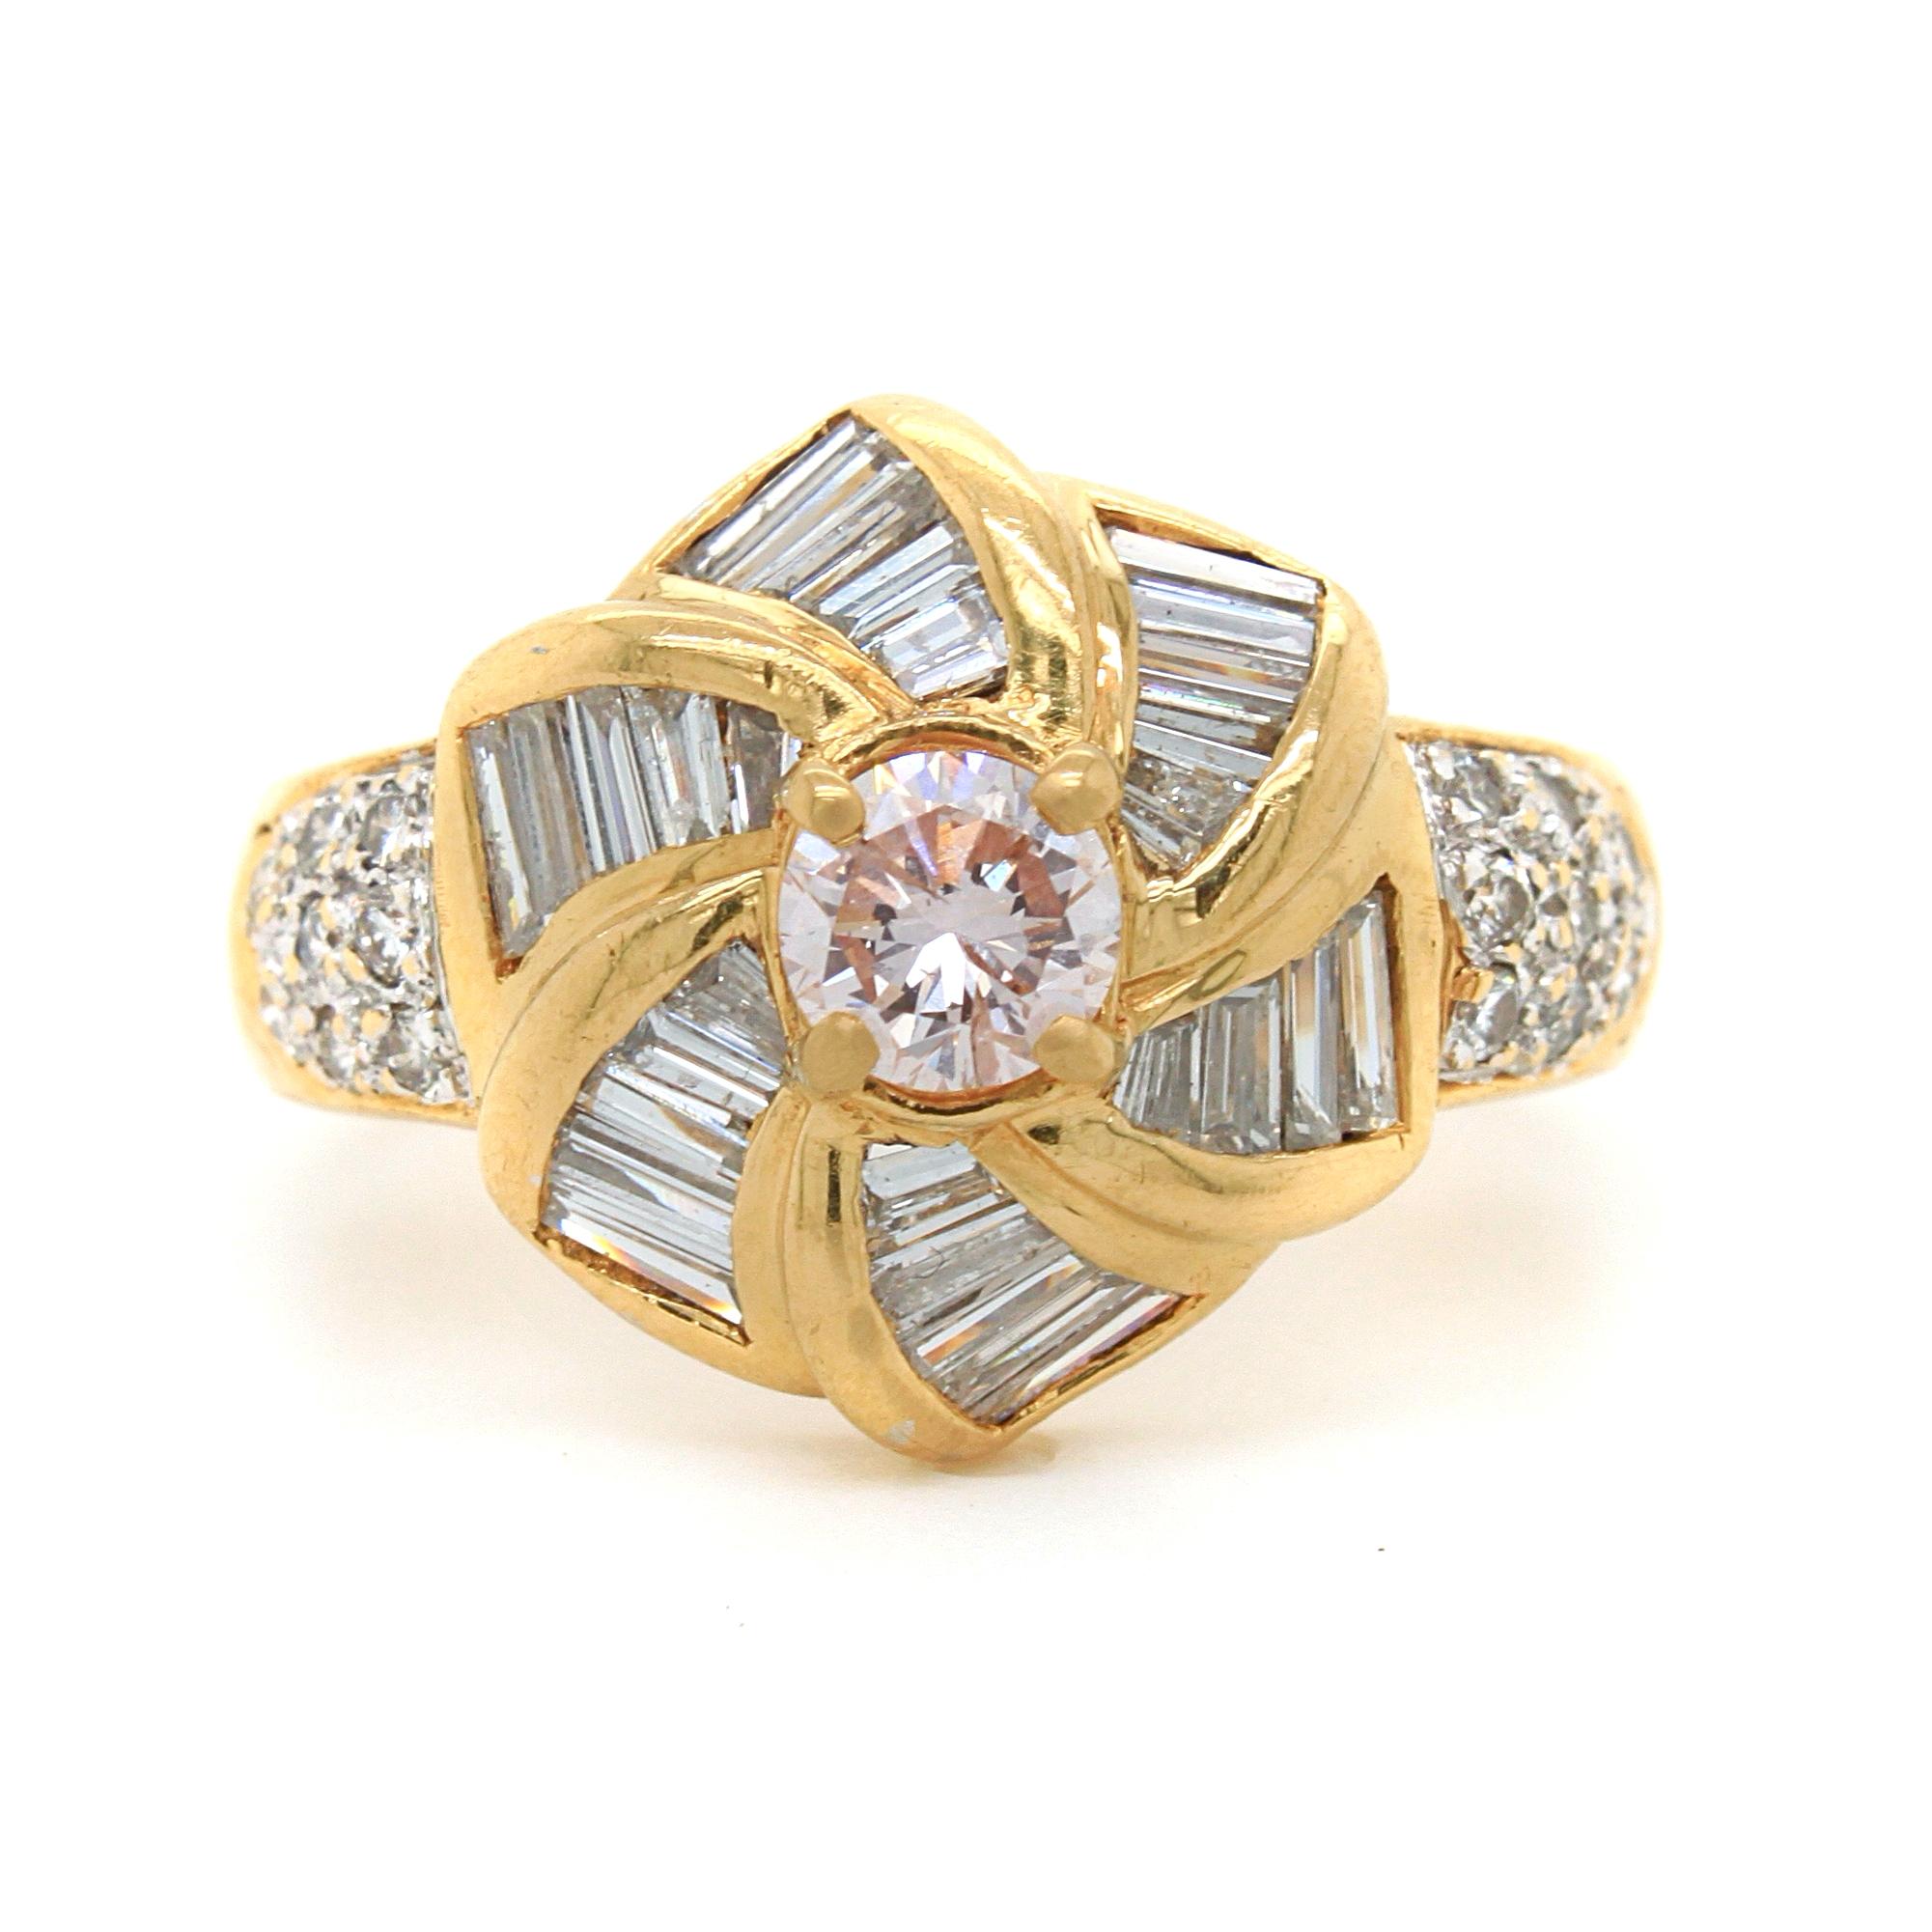 A pink and white diamond ring in 18k yellow gold. The centre stone weighs approximately 0.4 carats and has a faint pink natural colour and SI1 clarity (not eye visible). It is surround by diamond baguettes in a windmill design and round brilliant